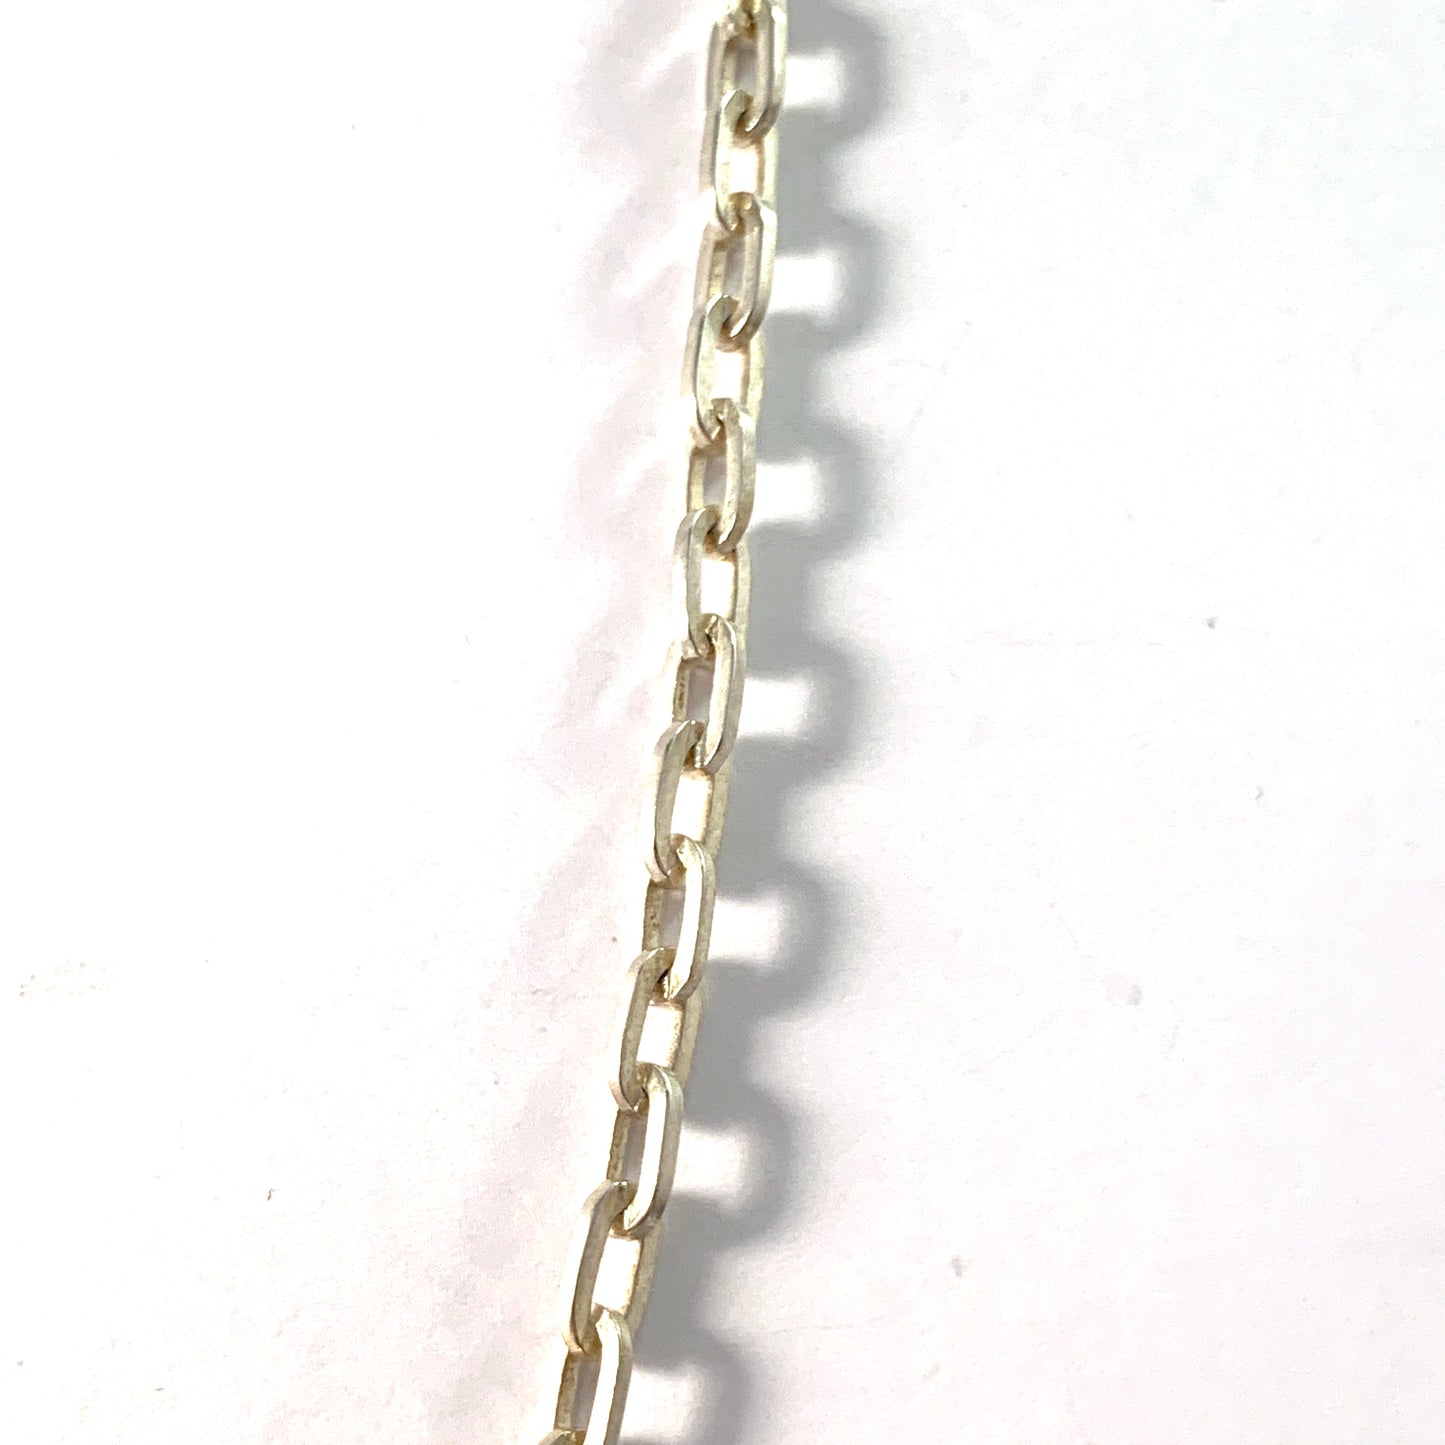 Claes E Giertta, Stockholm. Vintage Sterling Silver Chain Necklace. Signed